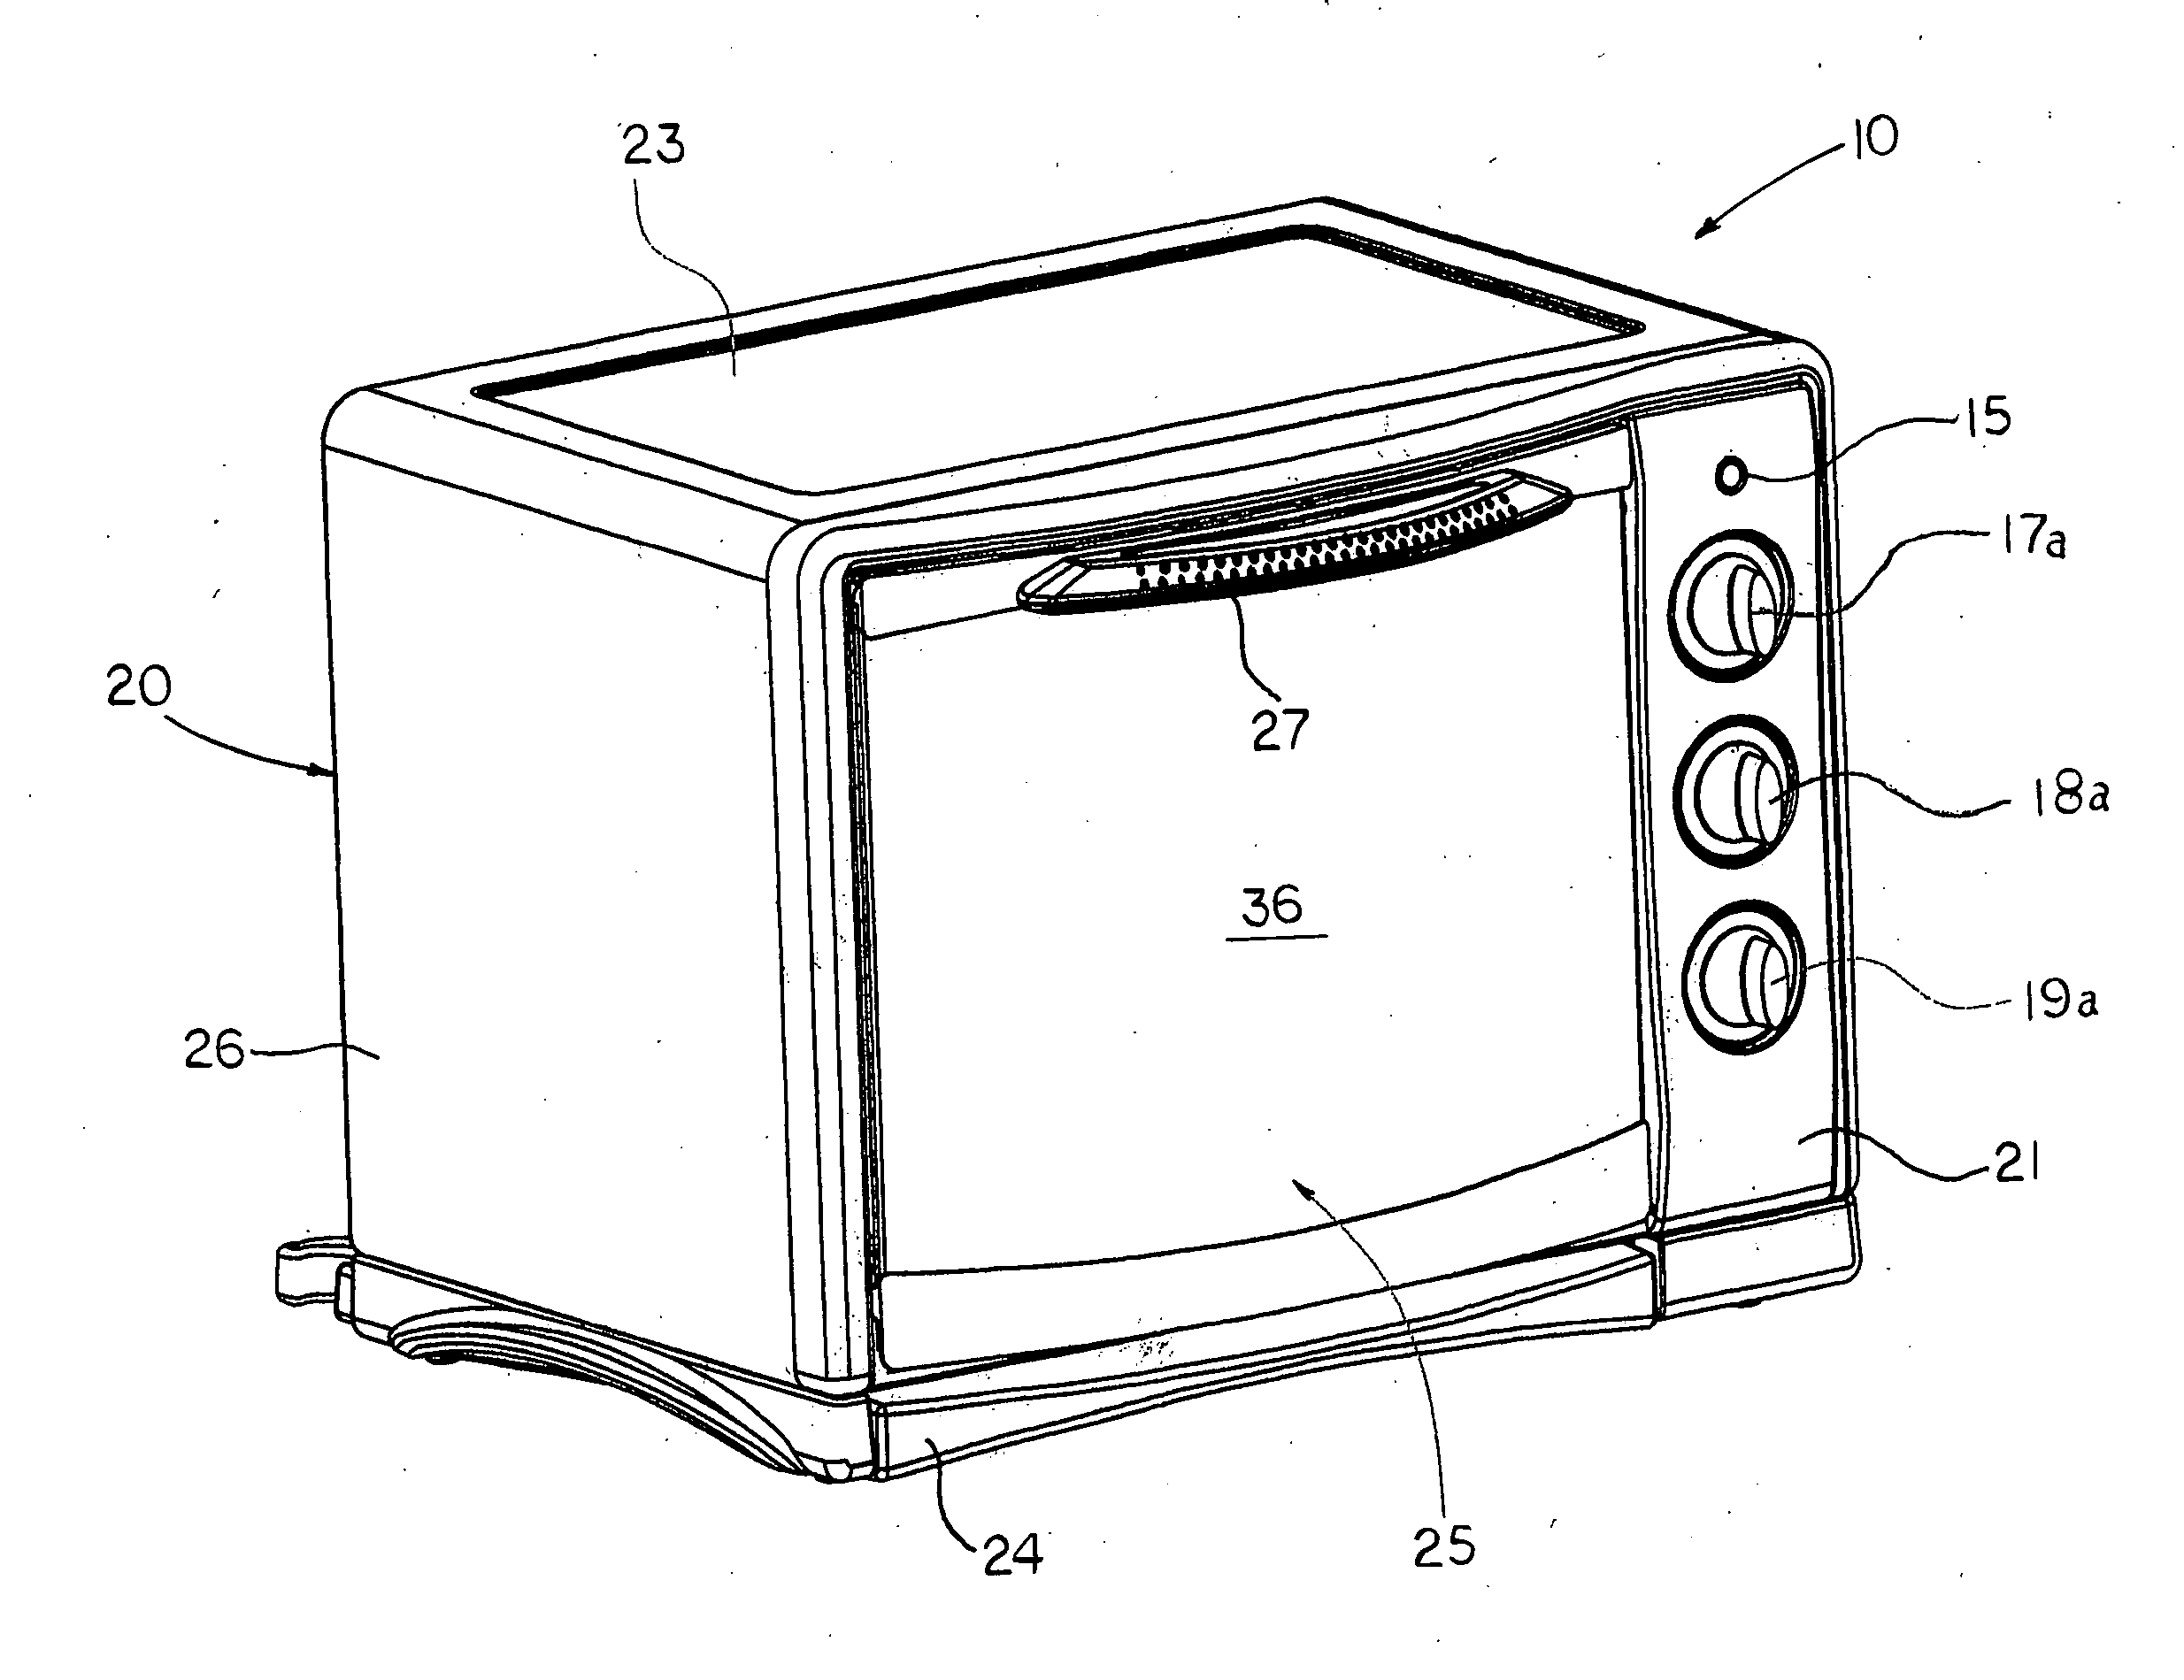 Rotisserie convection oven with rotatable cooking drum and method of use